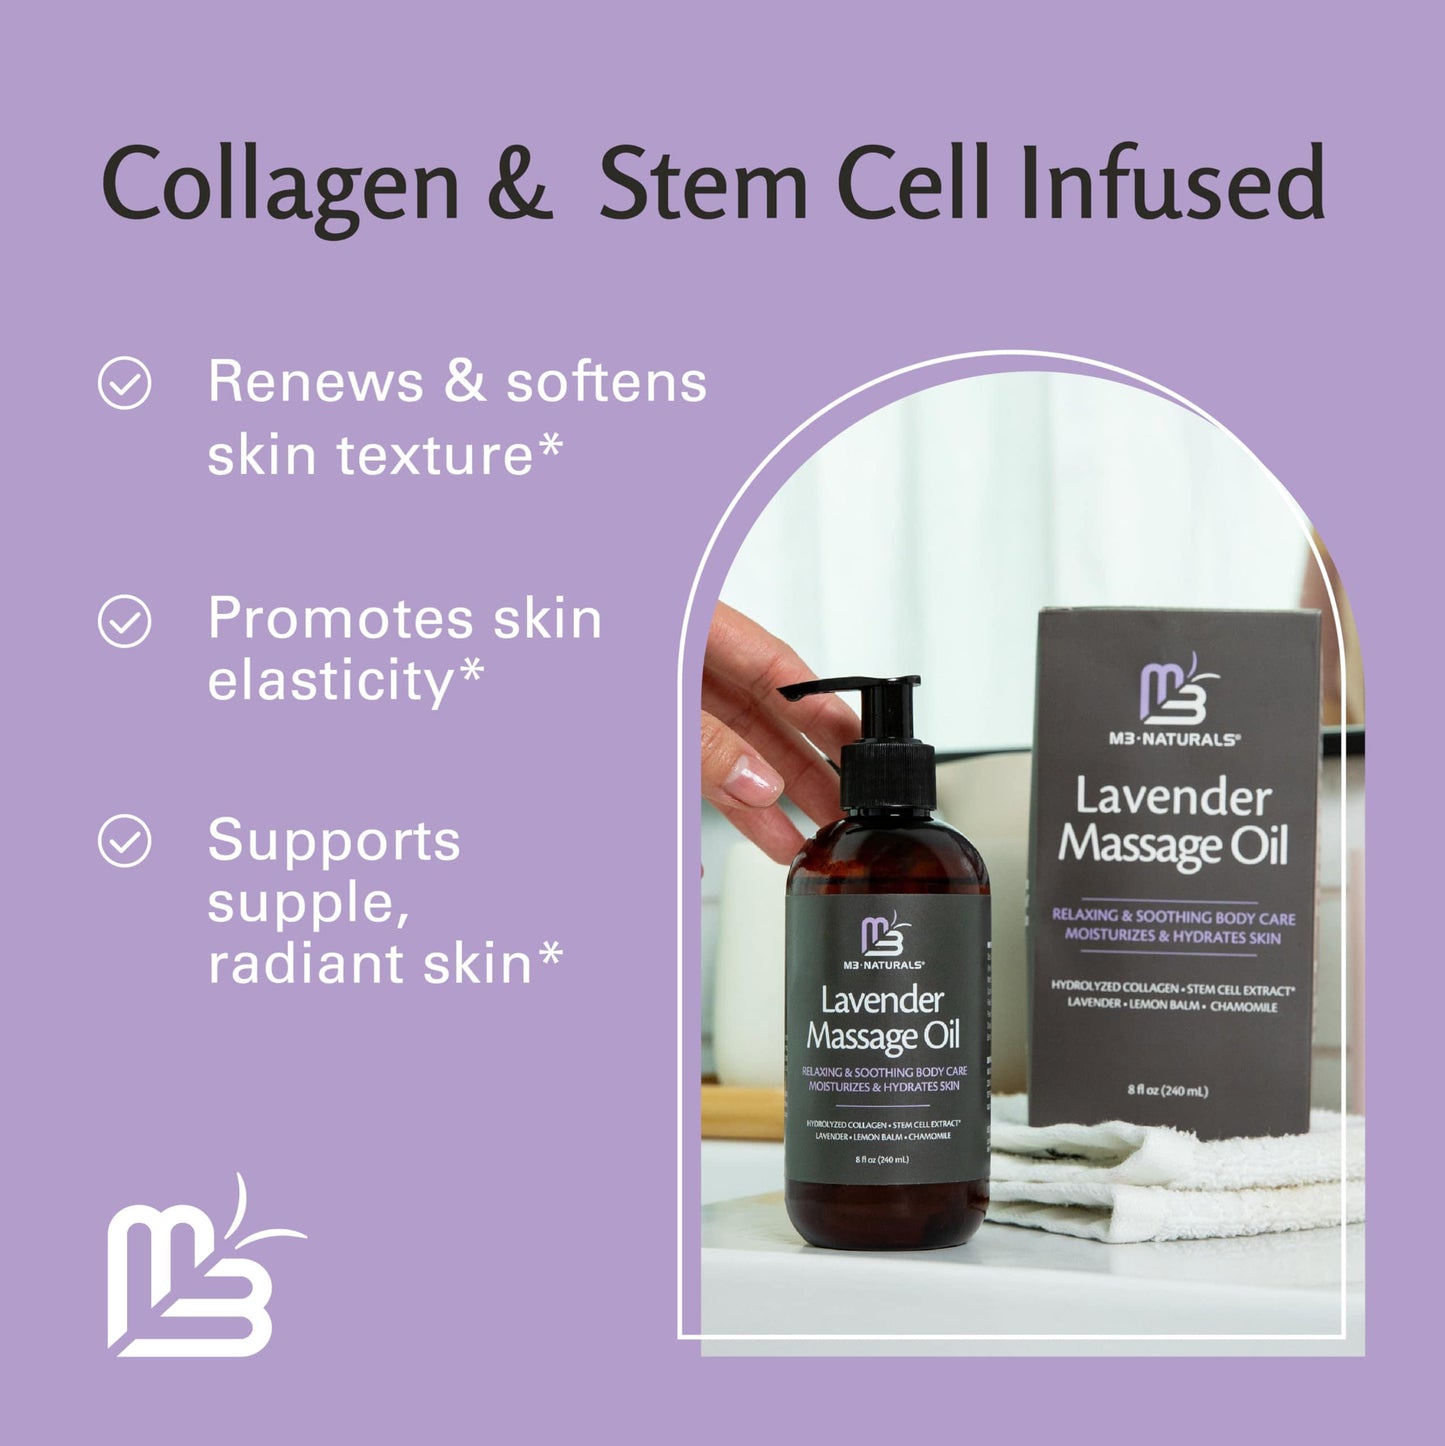 Anti Cellulite Massage Oil for Massage Therapy - Collagen and Stem Cell Skin Tightening Cellulite Cream for Women - 8 Fl Oz by M3 Naturals